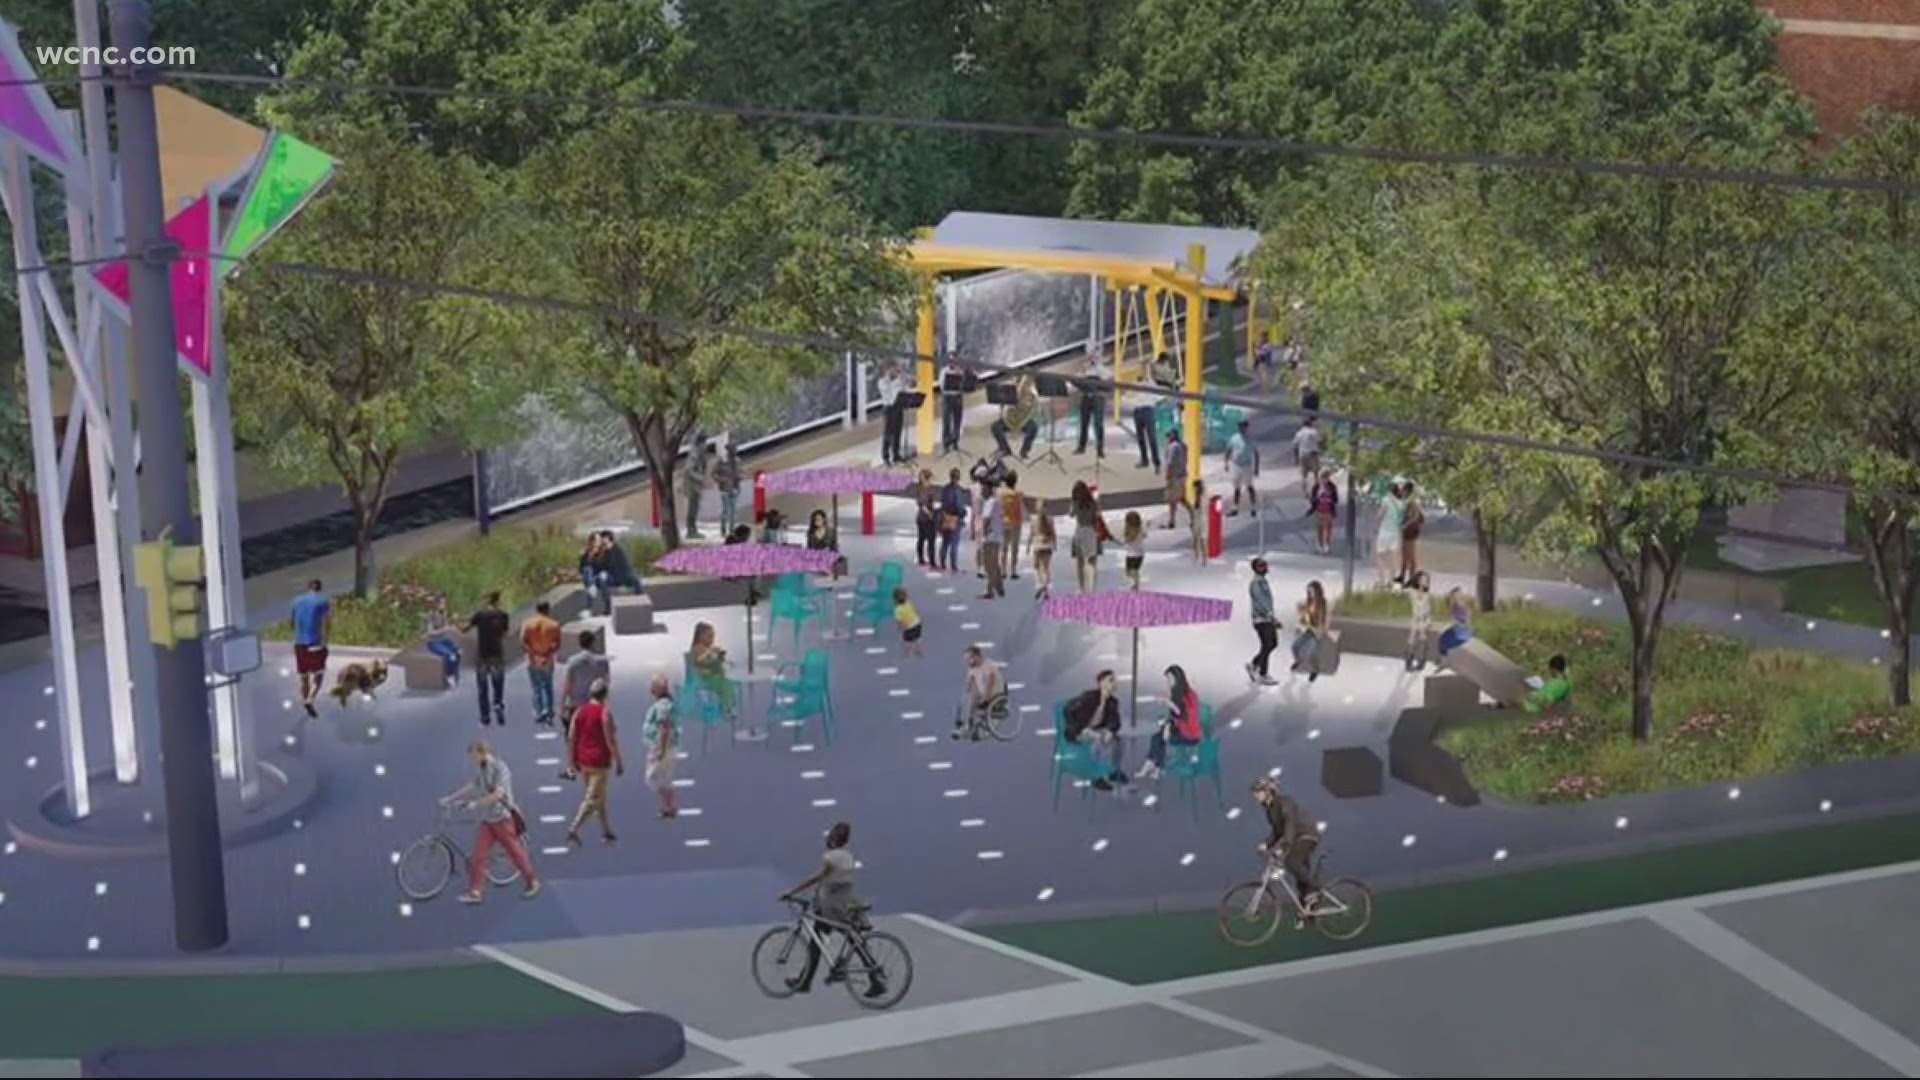 Groundbreaking will begin Thursday on a project that Charlotte leaders hope will help revitalize the Beatties Ford corridor in north Charlotte.